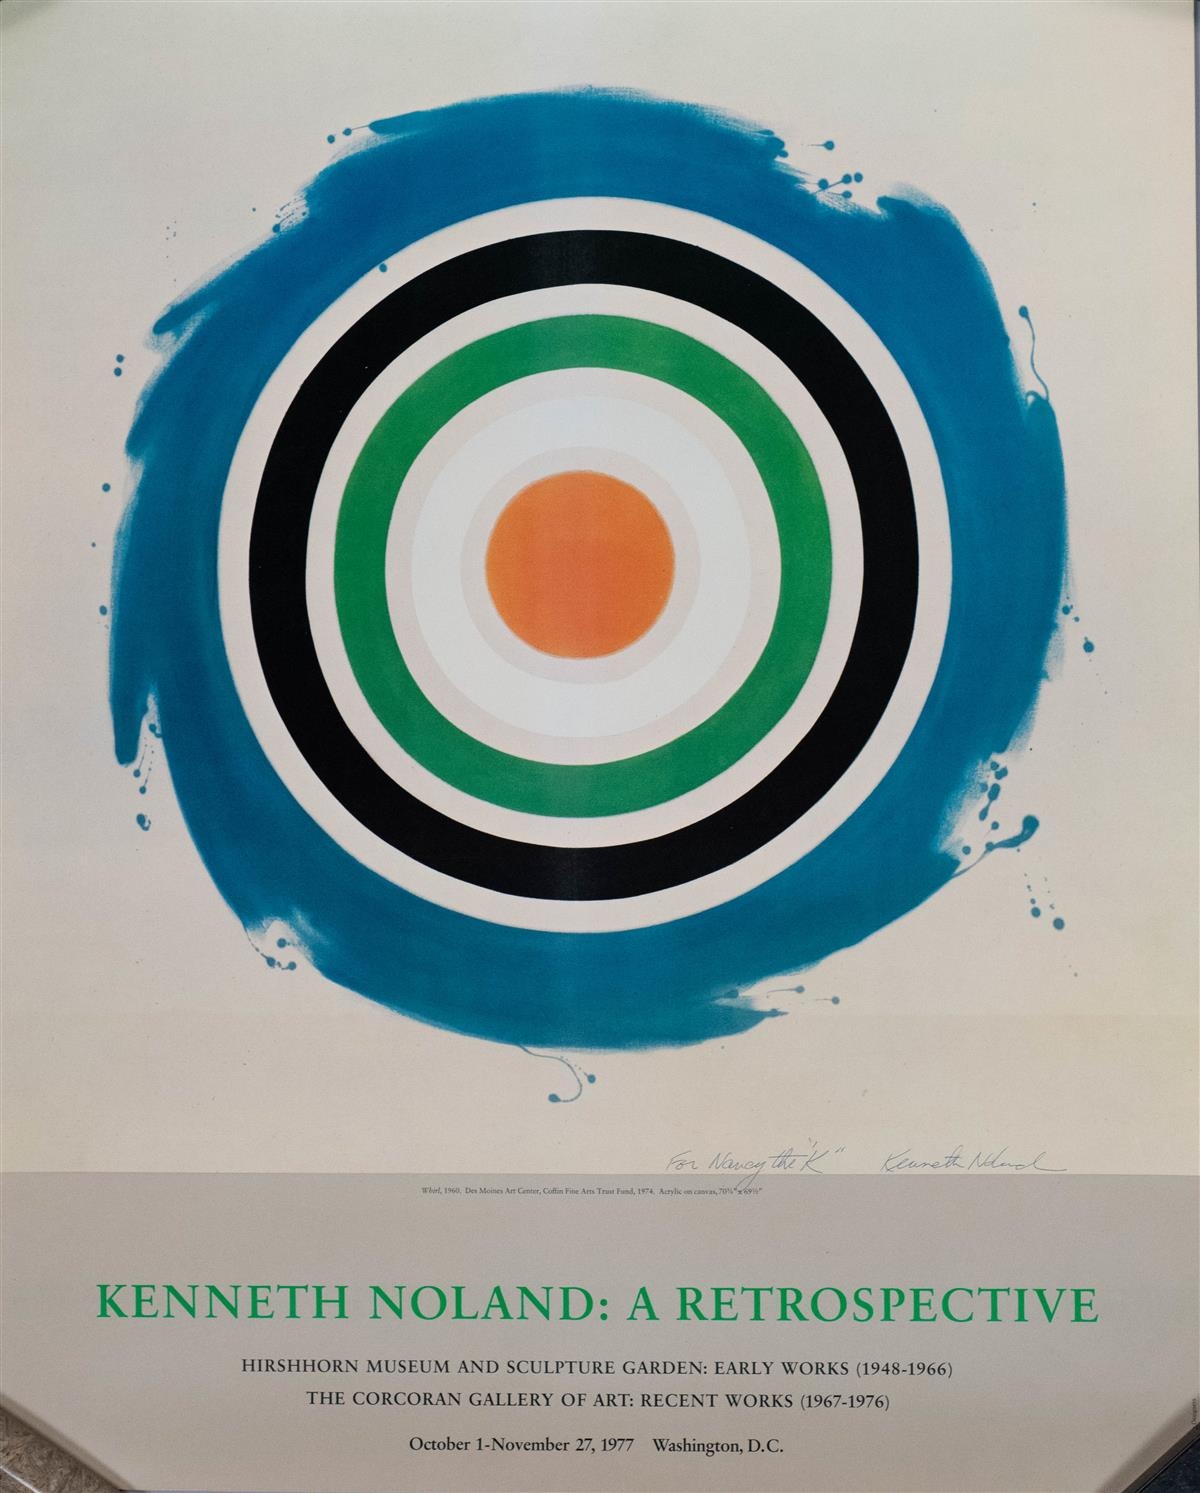 EXHIBITION POSTER for HIRSHHORN RETROSPECTIVE by Kenneth Noland, 1977